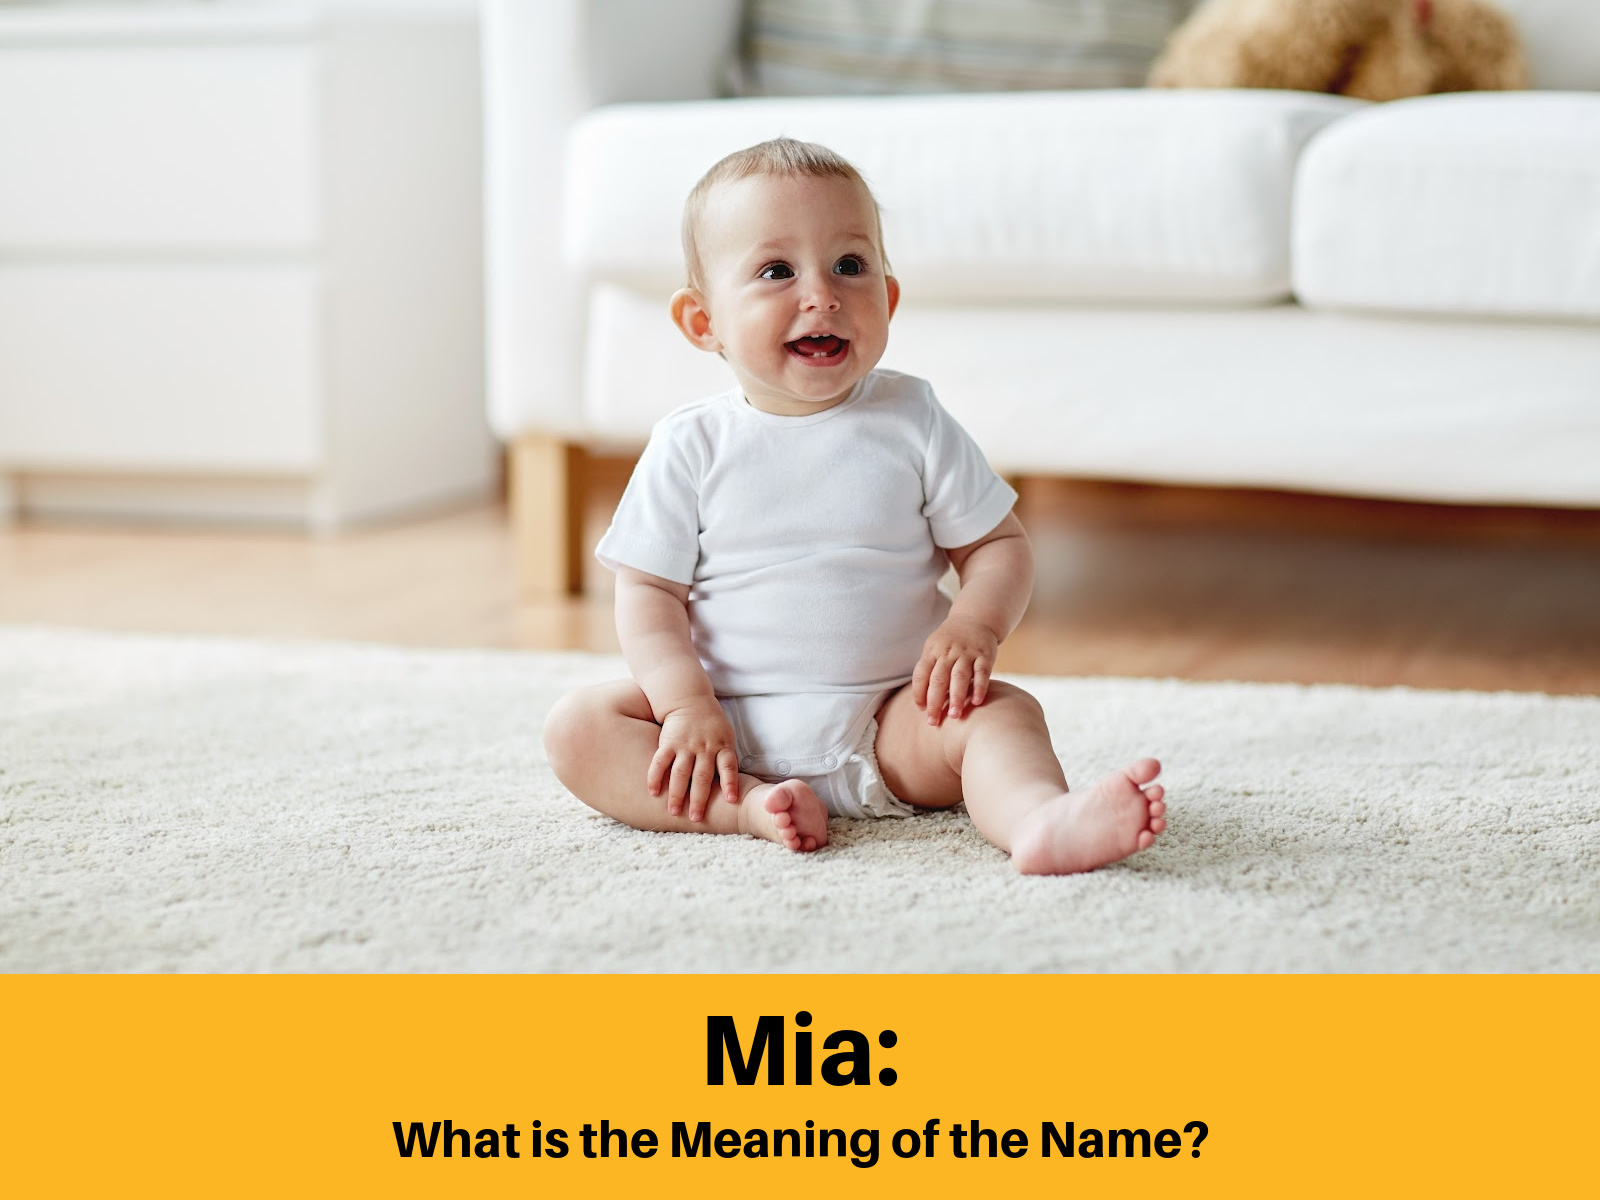 Meaning of name Mia